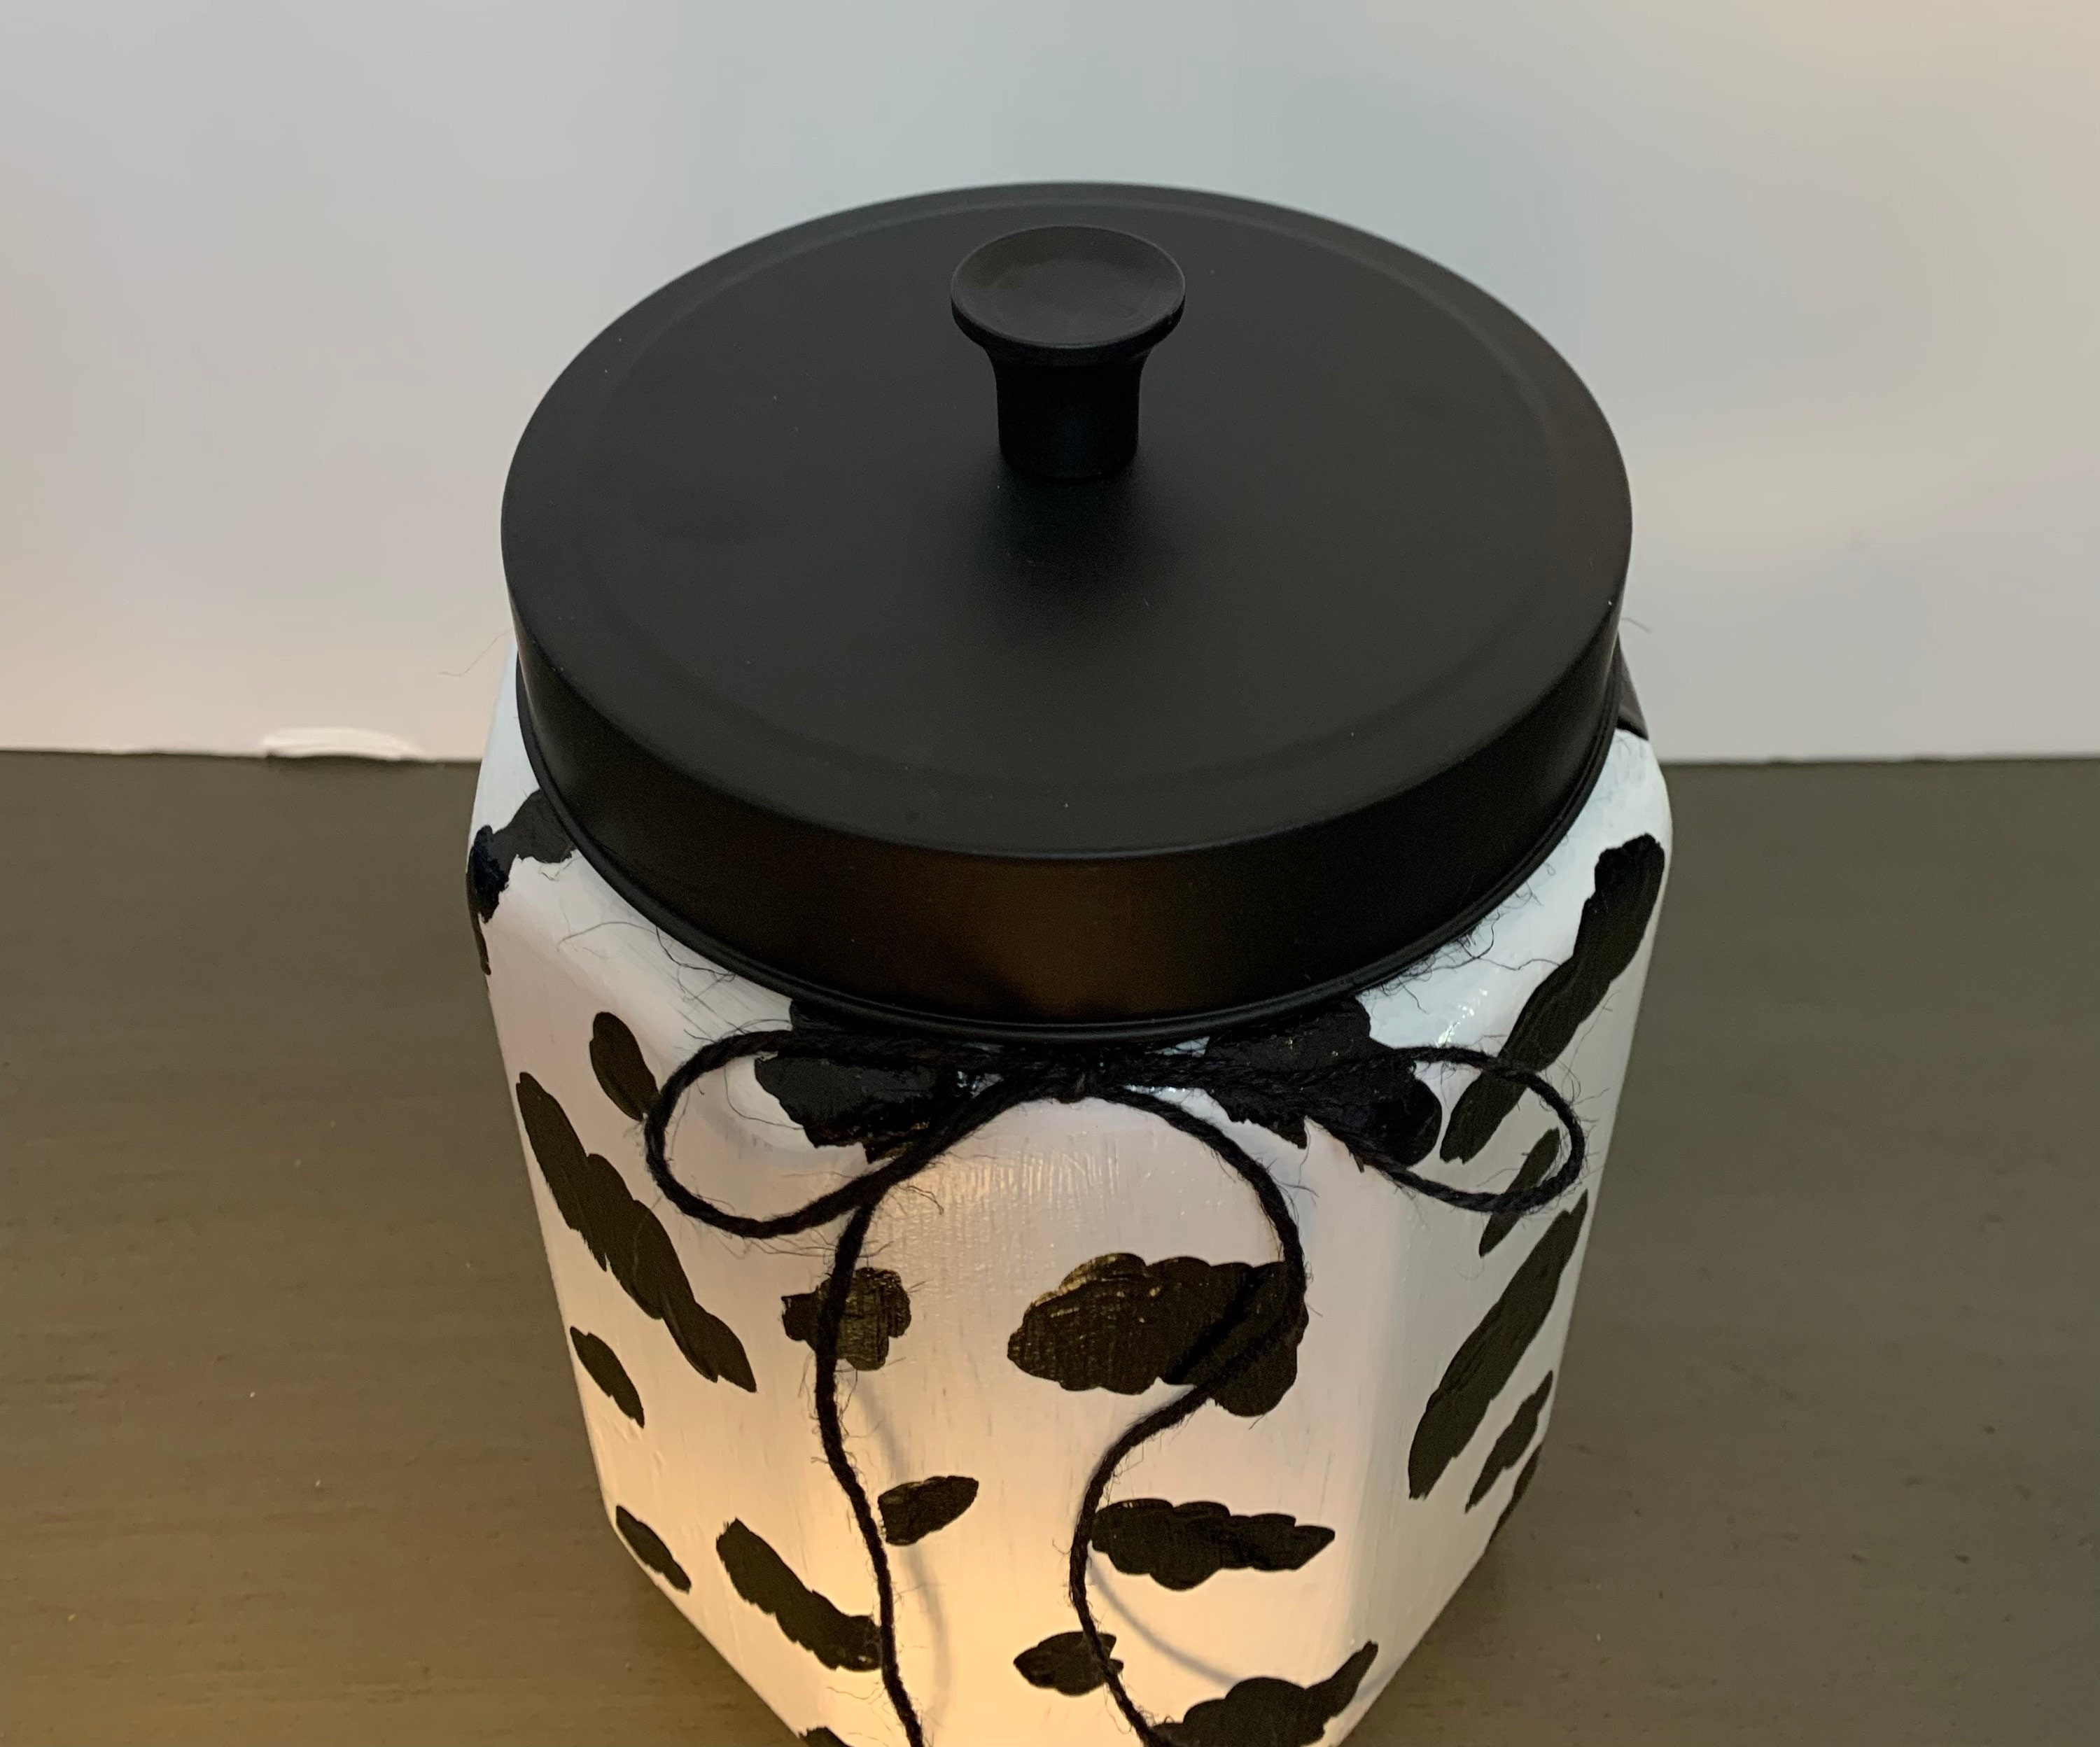 Black and White Canister Set Kitchen Cookie Jar, Decorative